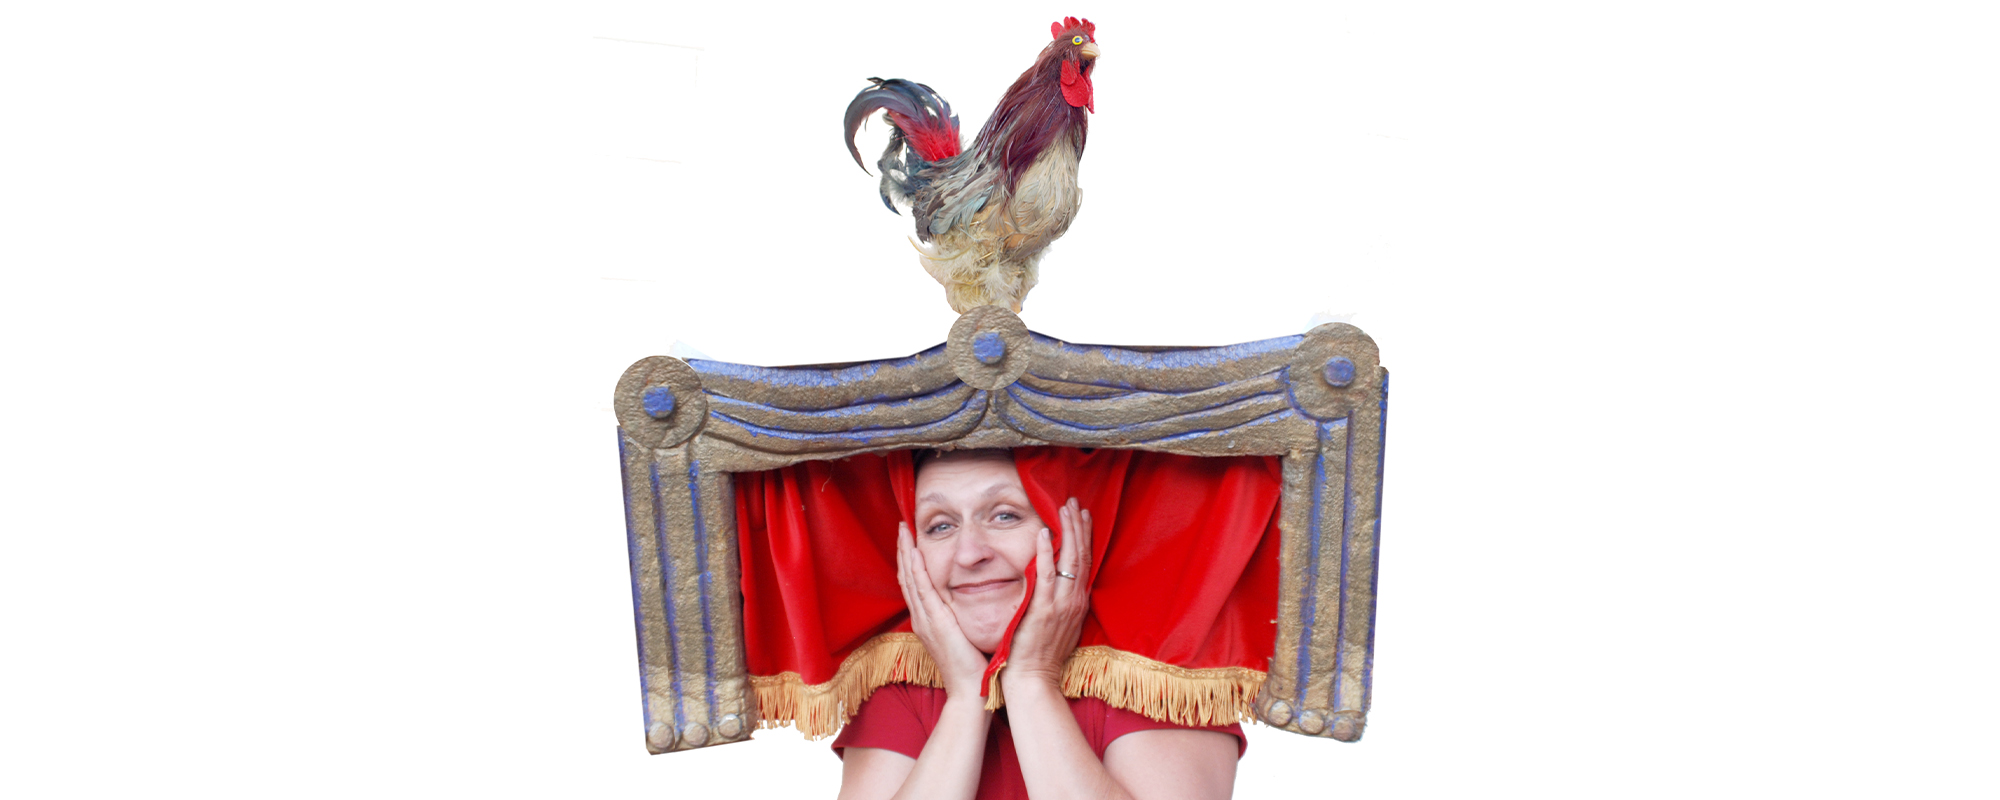 Women wearing hat that look like a stage complete with red curtain and rooster sitting on top of stage